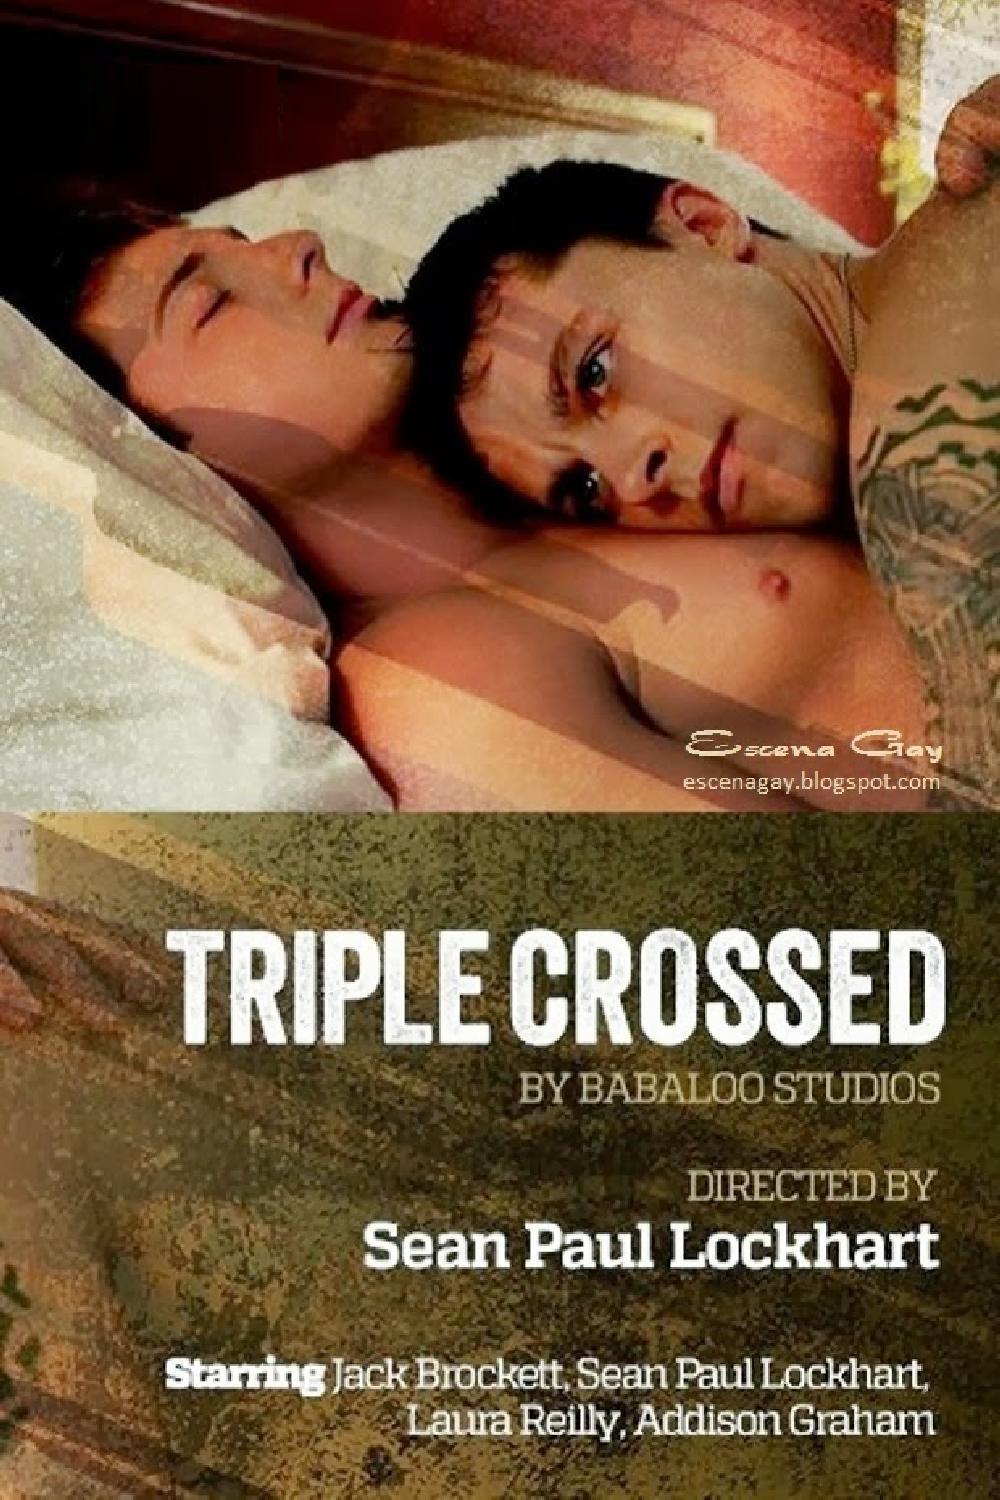 Triple Crossed DVD (with Cover Autographed by SPL) DVD0001